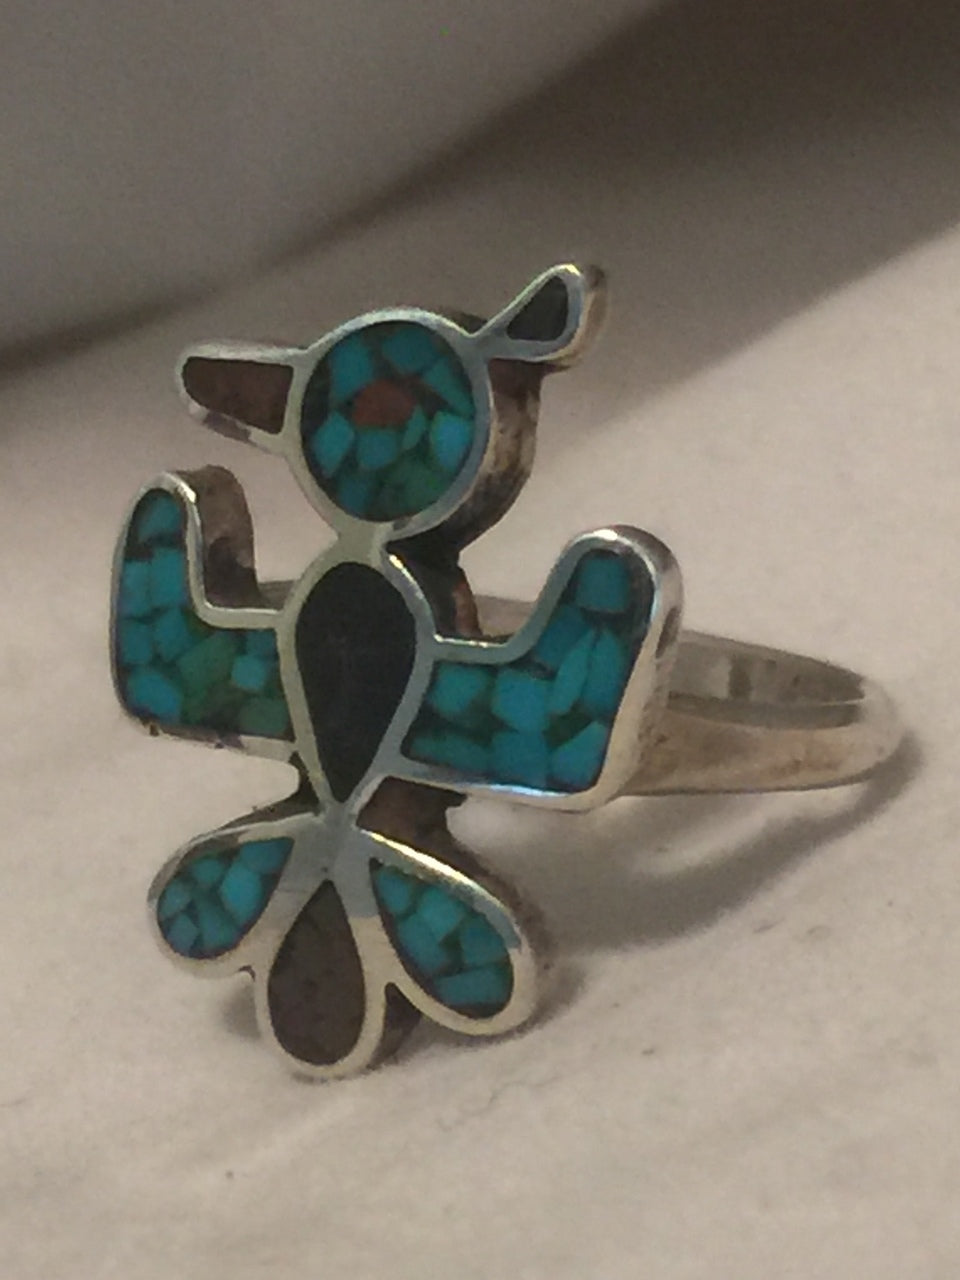 Vintage Sterling Silver Southwest Tribal Turquoise & Coral Chip Bird Ring Size 6.5 4.1g